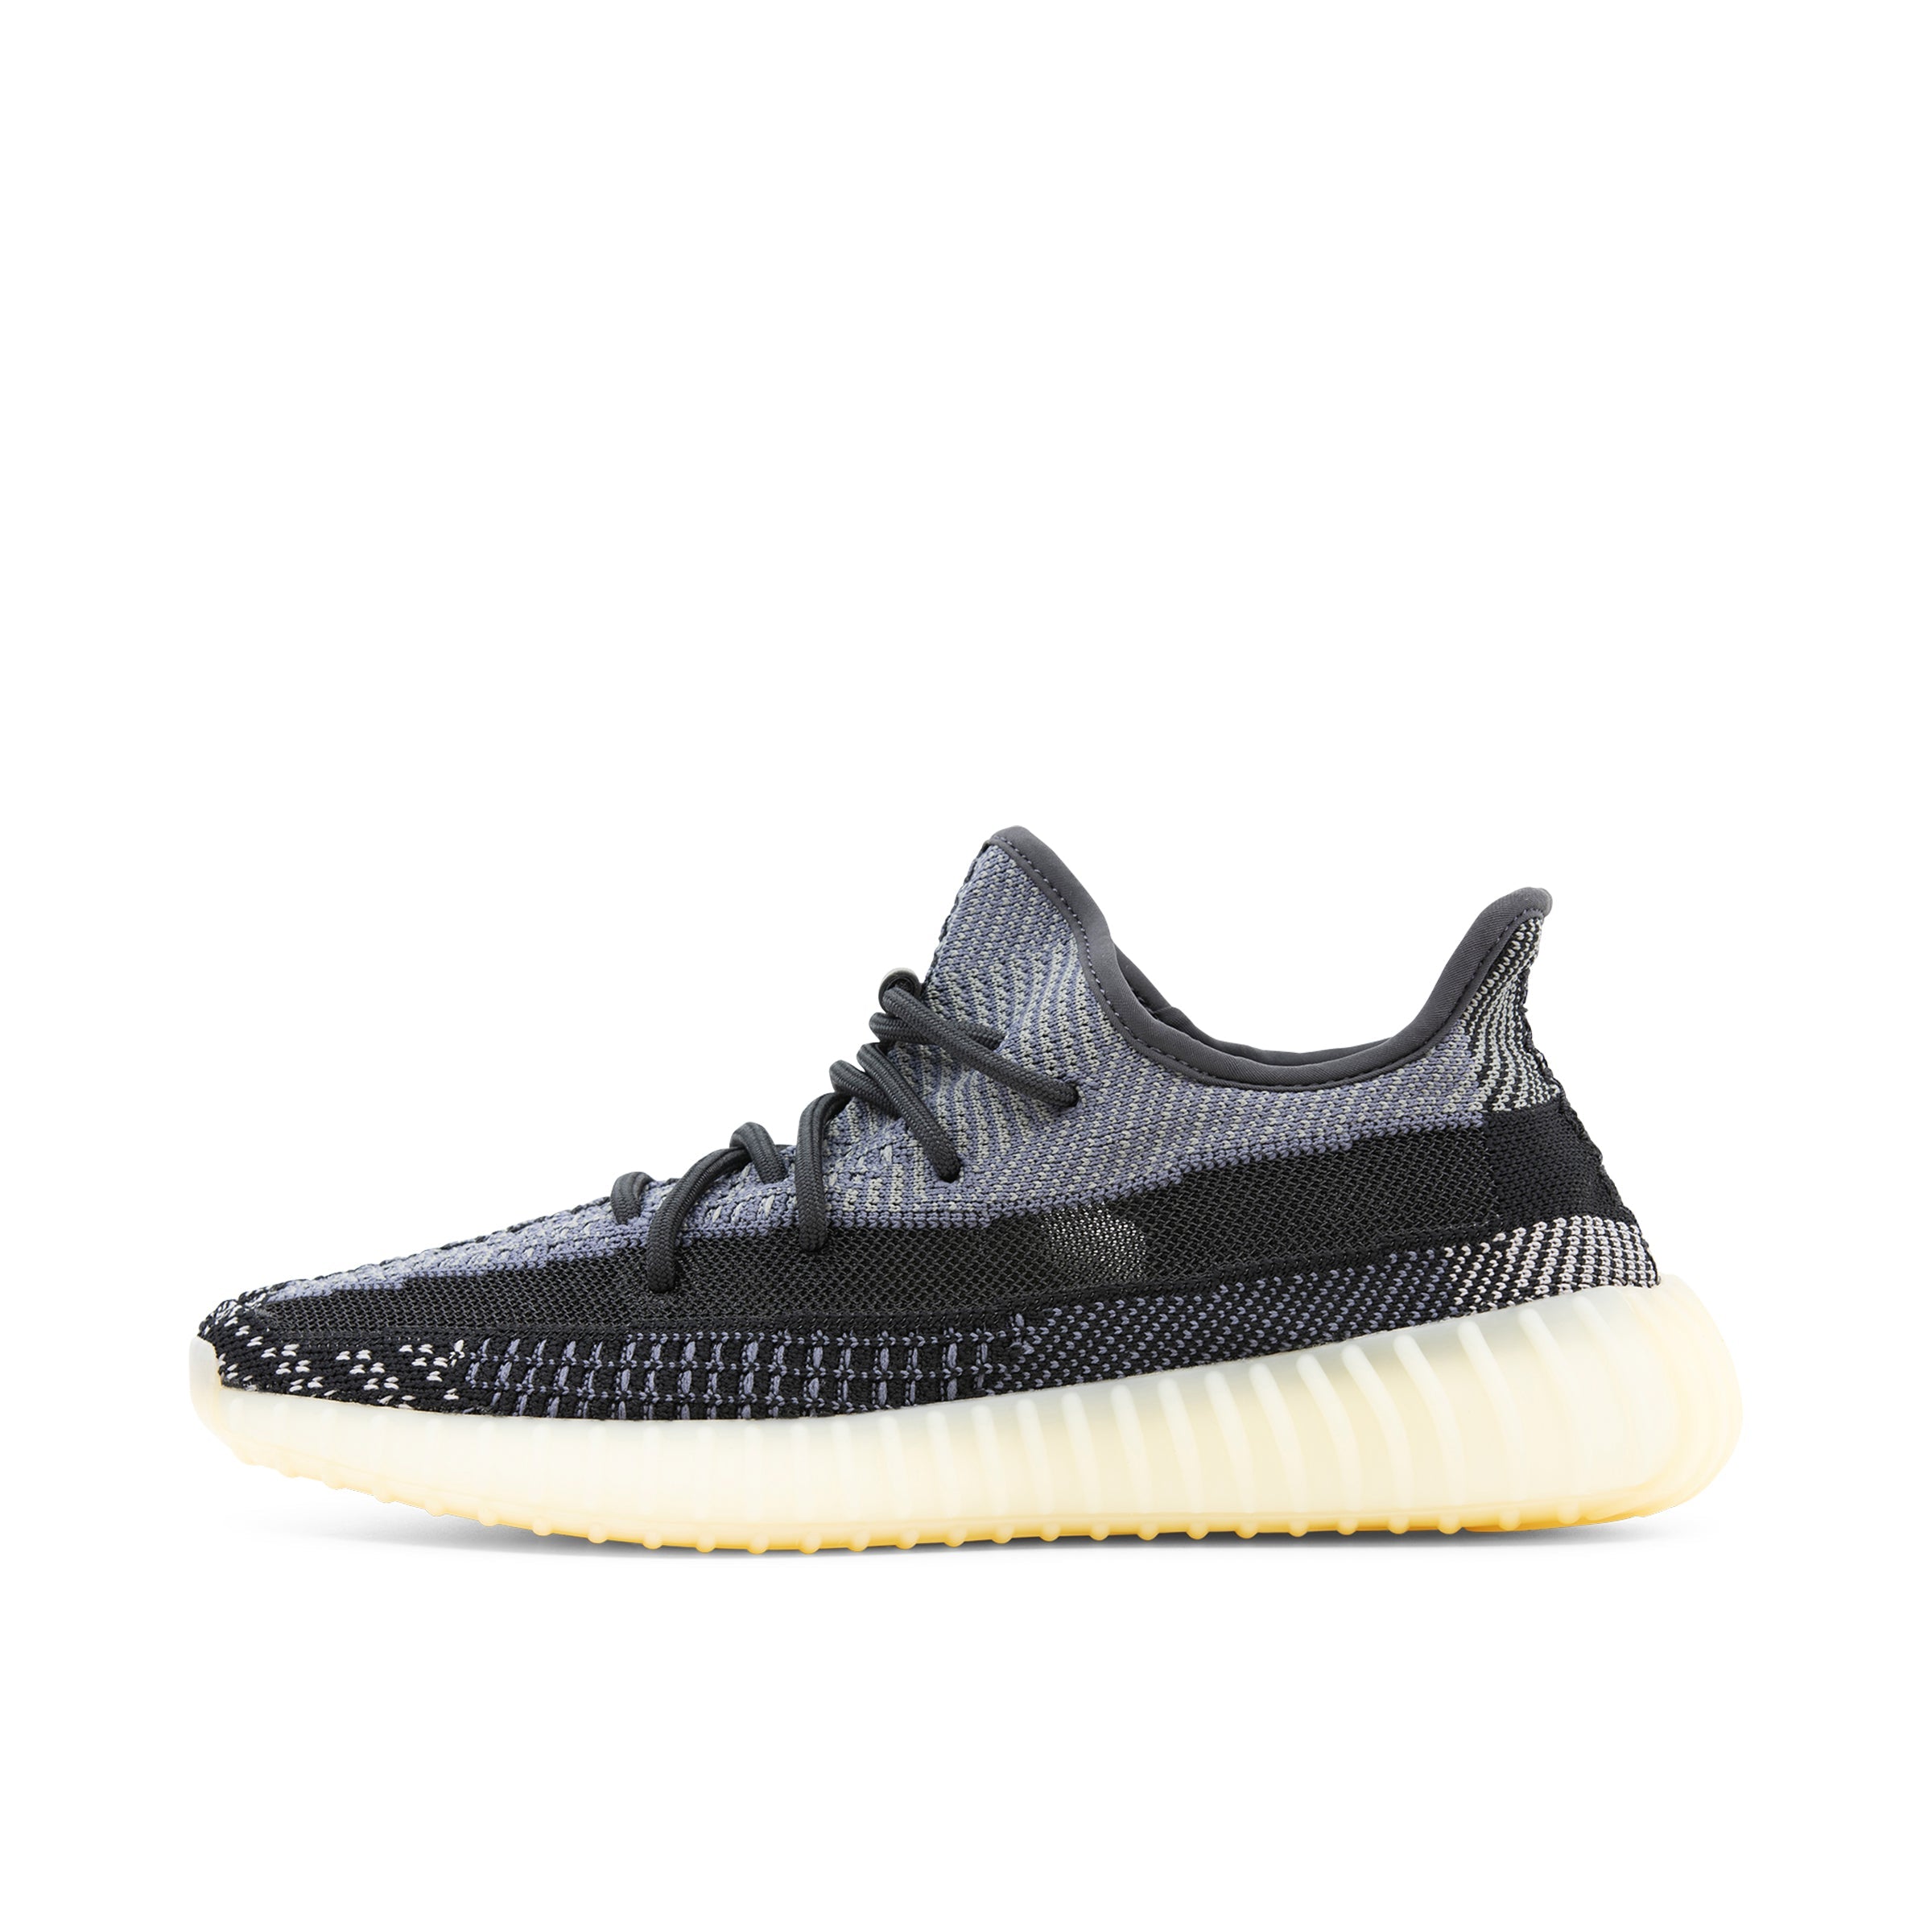 YEEZY BOOST 350 V2 CARBONO